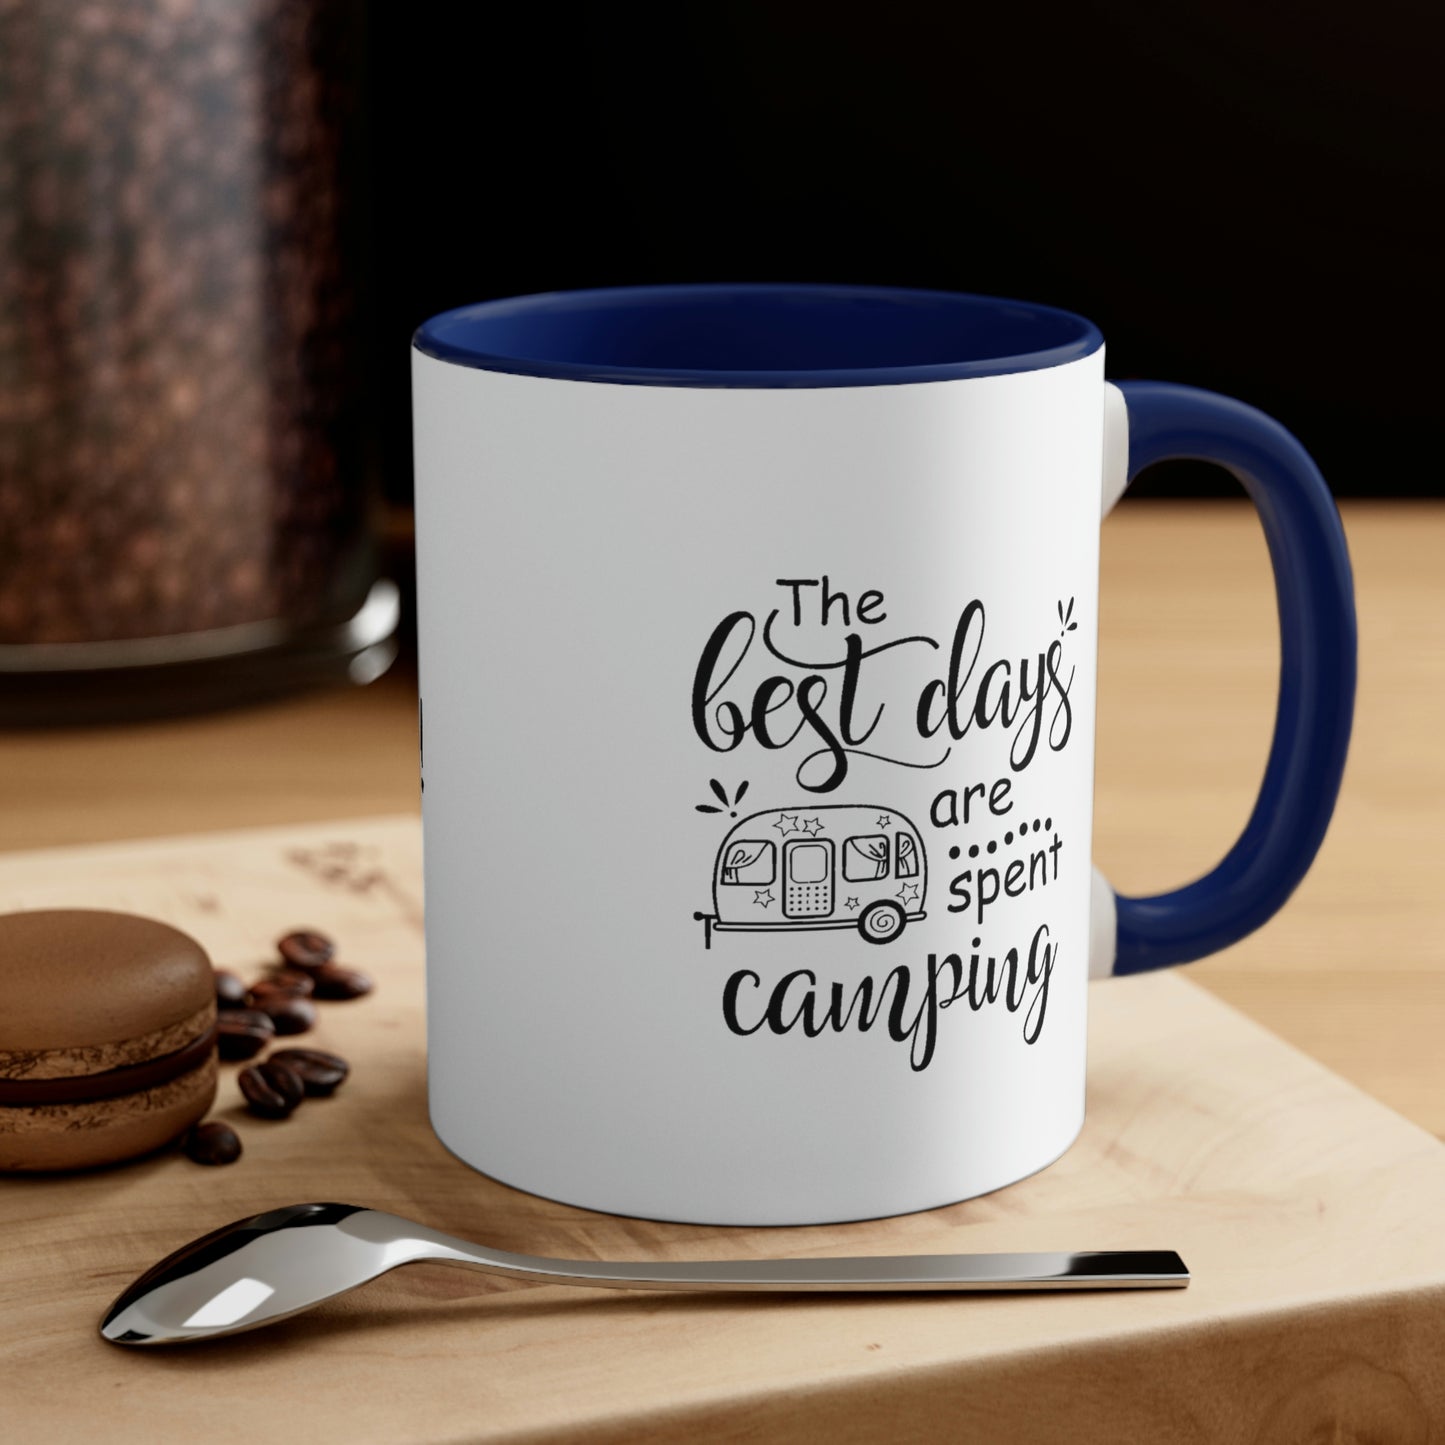 Best Days are Spending Camping Accent Coffee Mug, 11oz